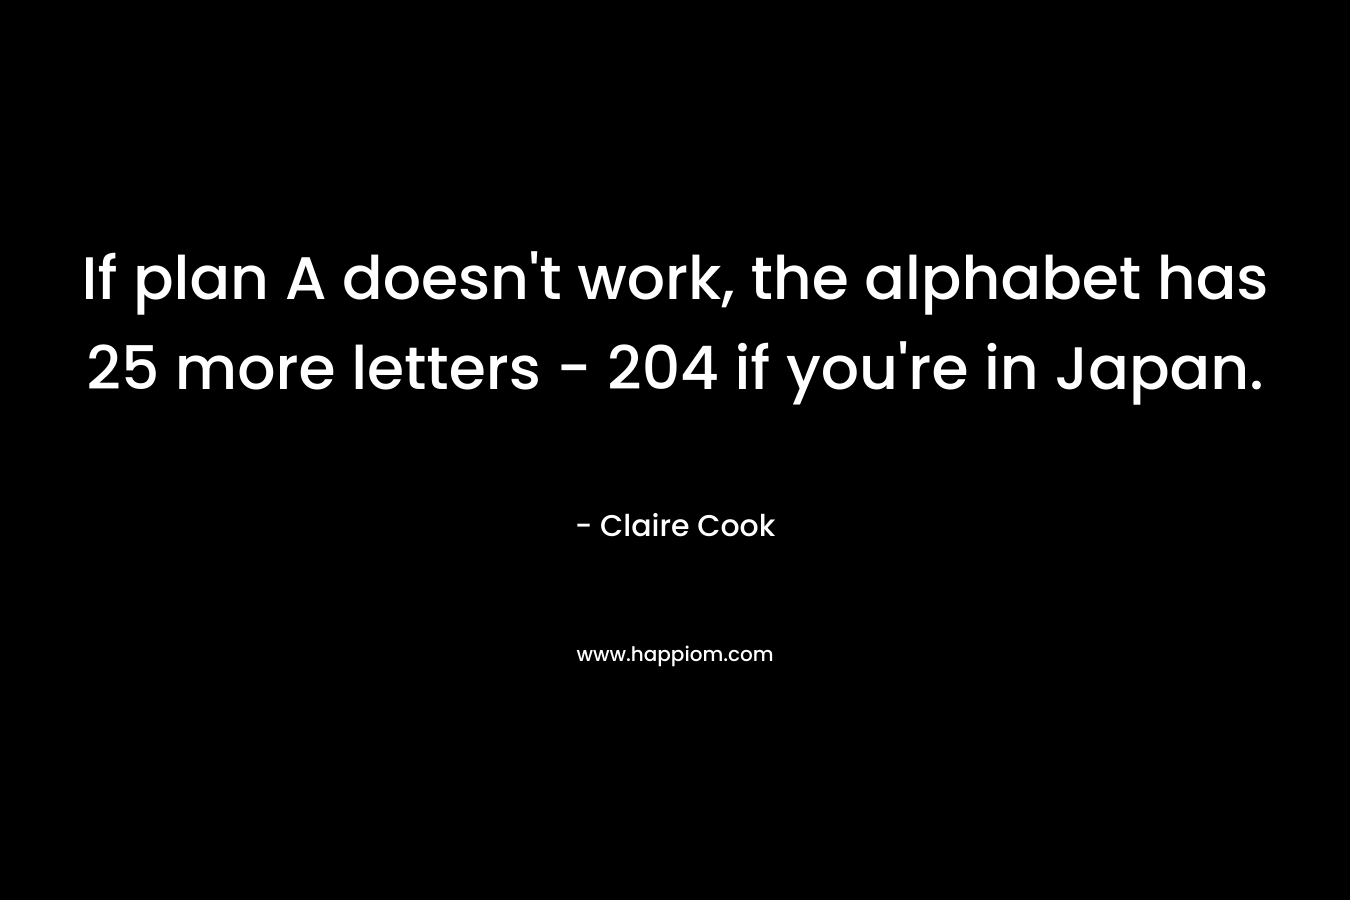 If plan A doesn’t work, the alphabet has 25 more letters – 204 if you’re in Japan. – Claire Cook